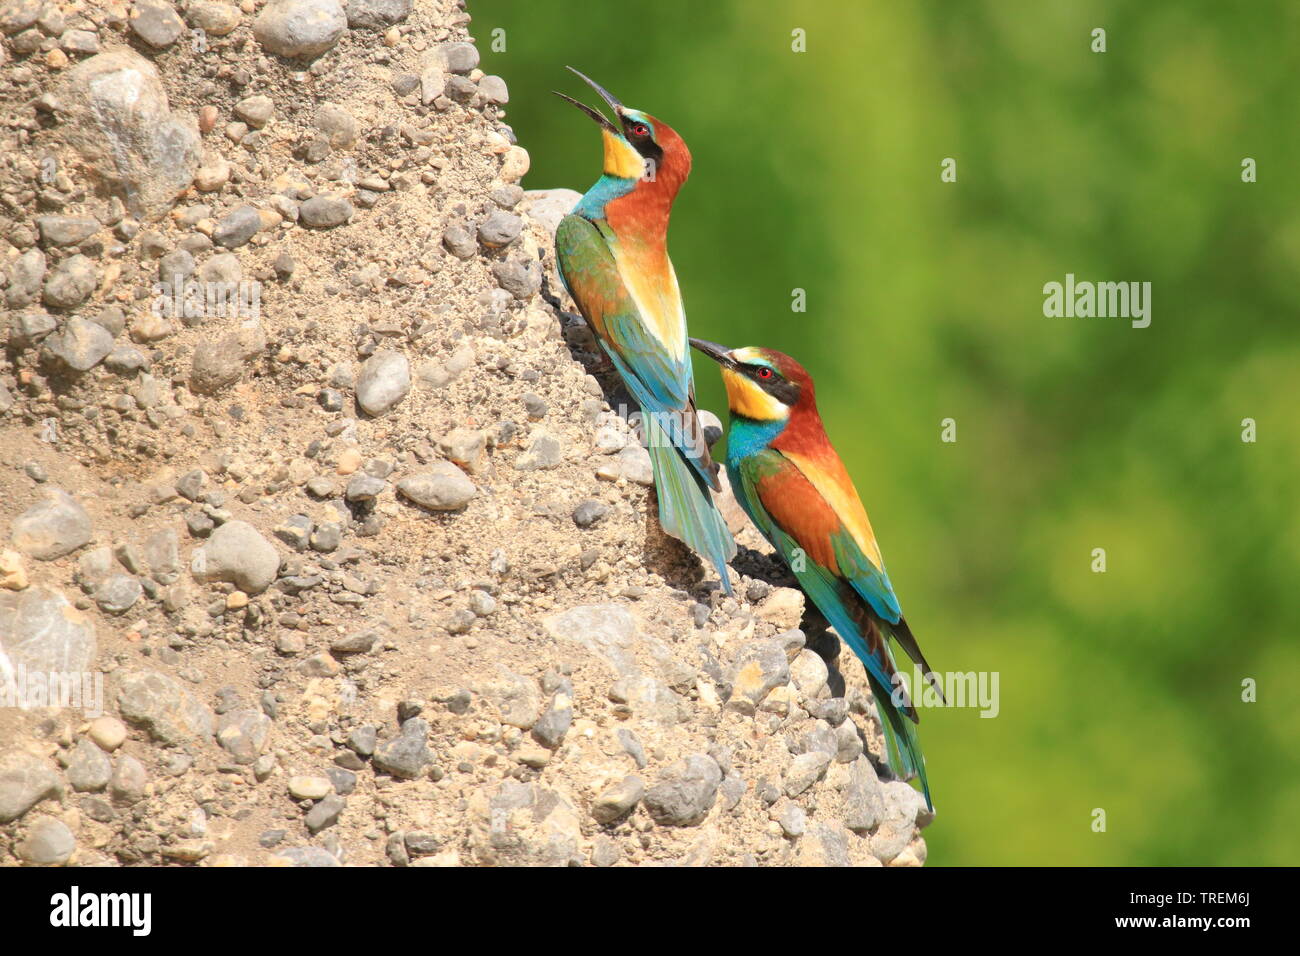 European bee-eater (Merops apiaster), beautiful colorful birds, colony on rocky slope Stock Photo